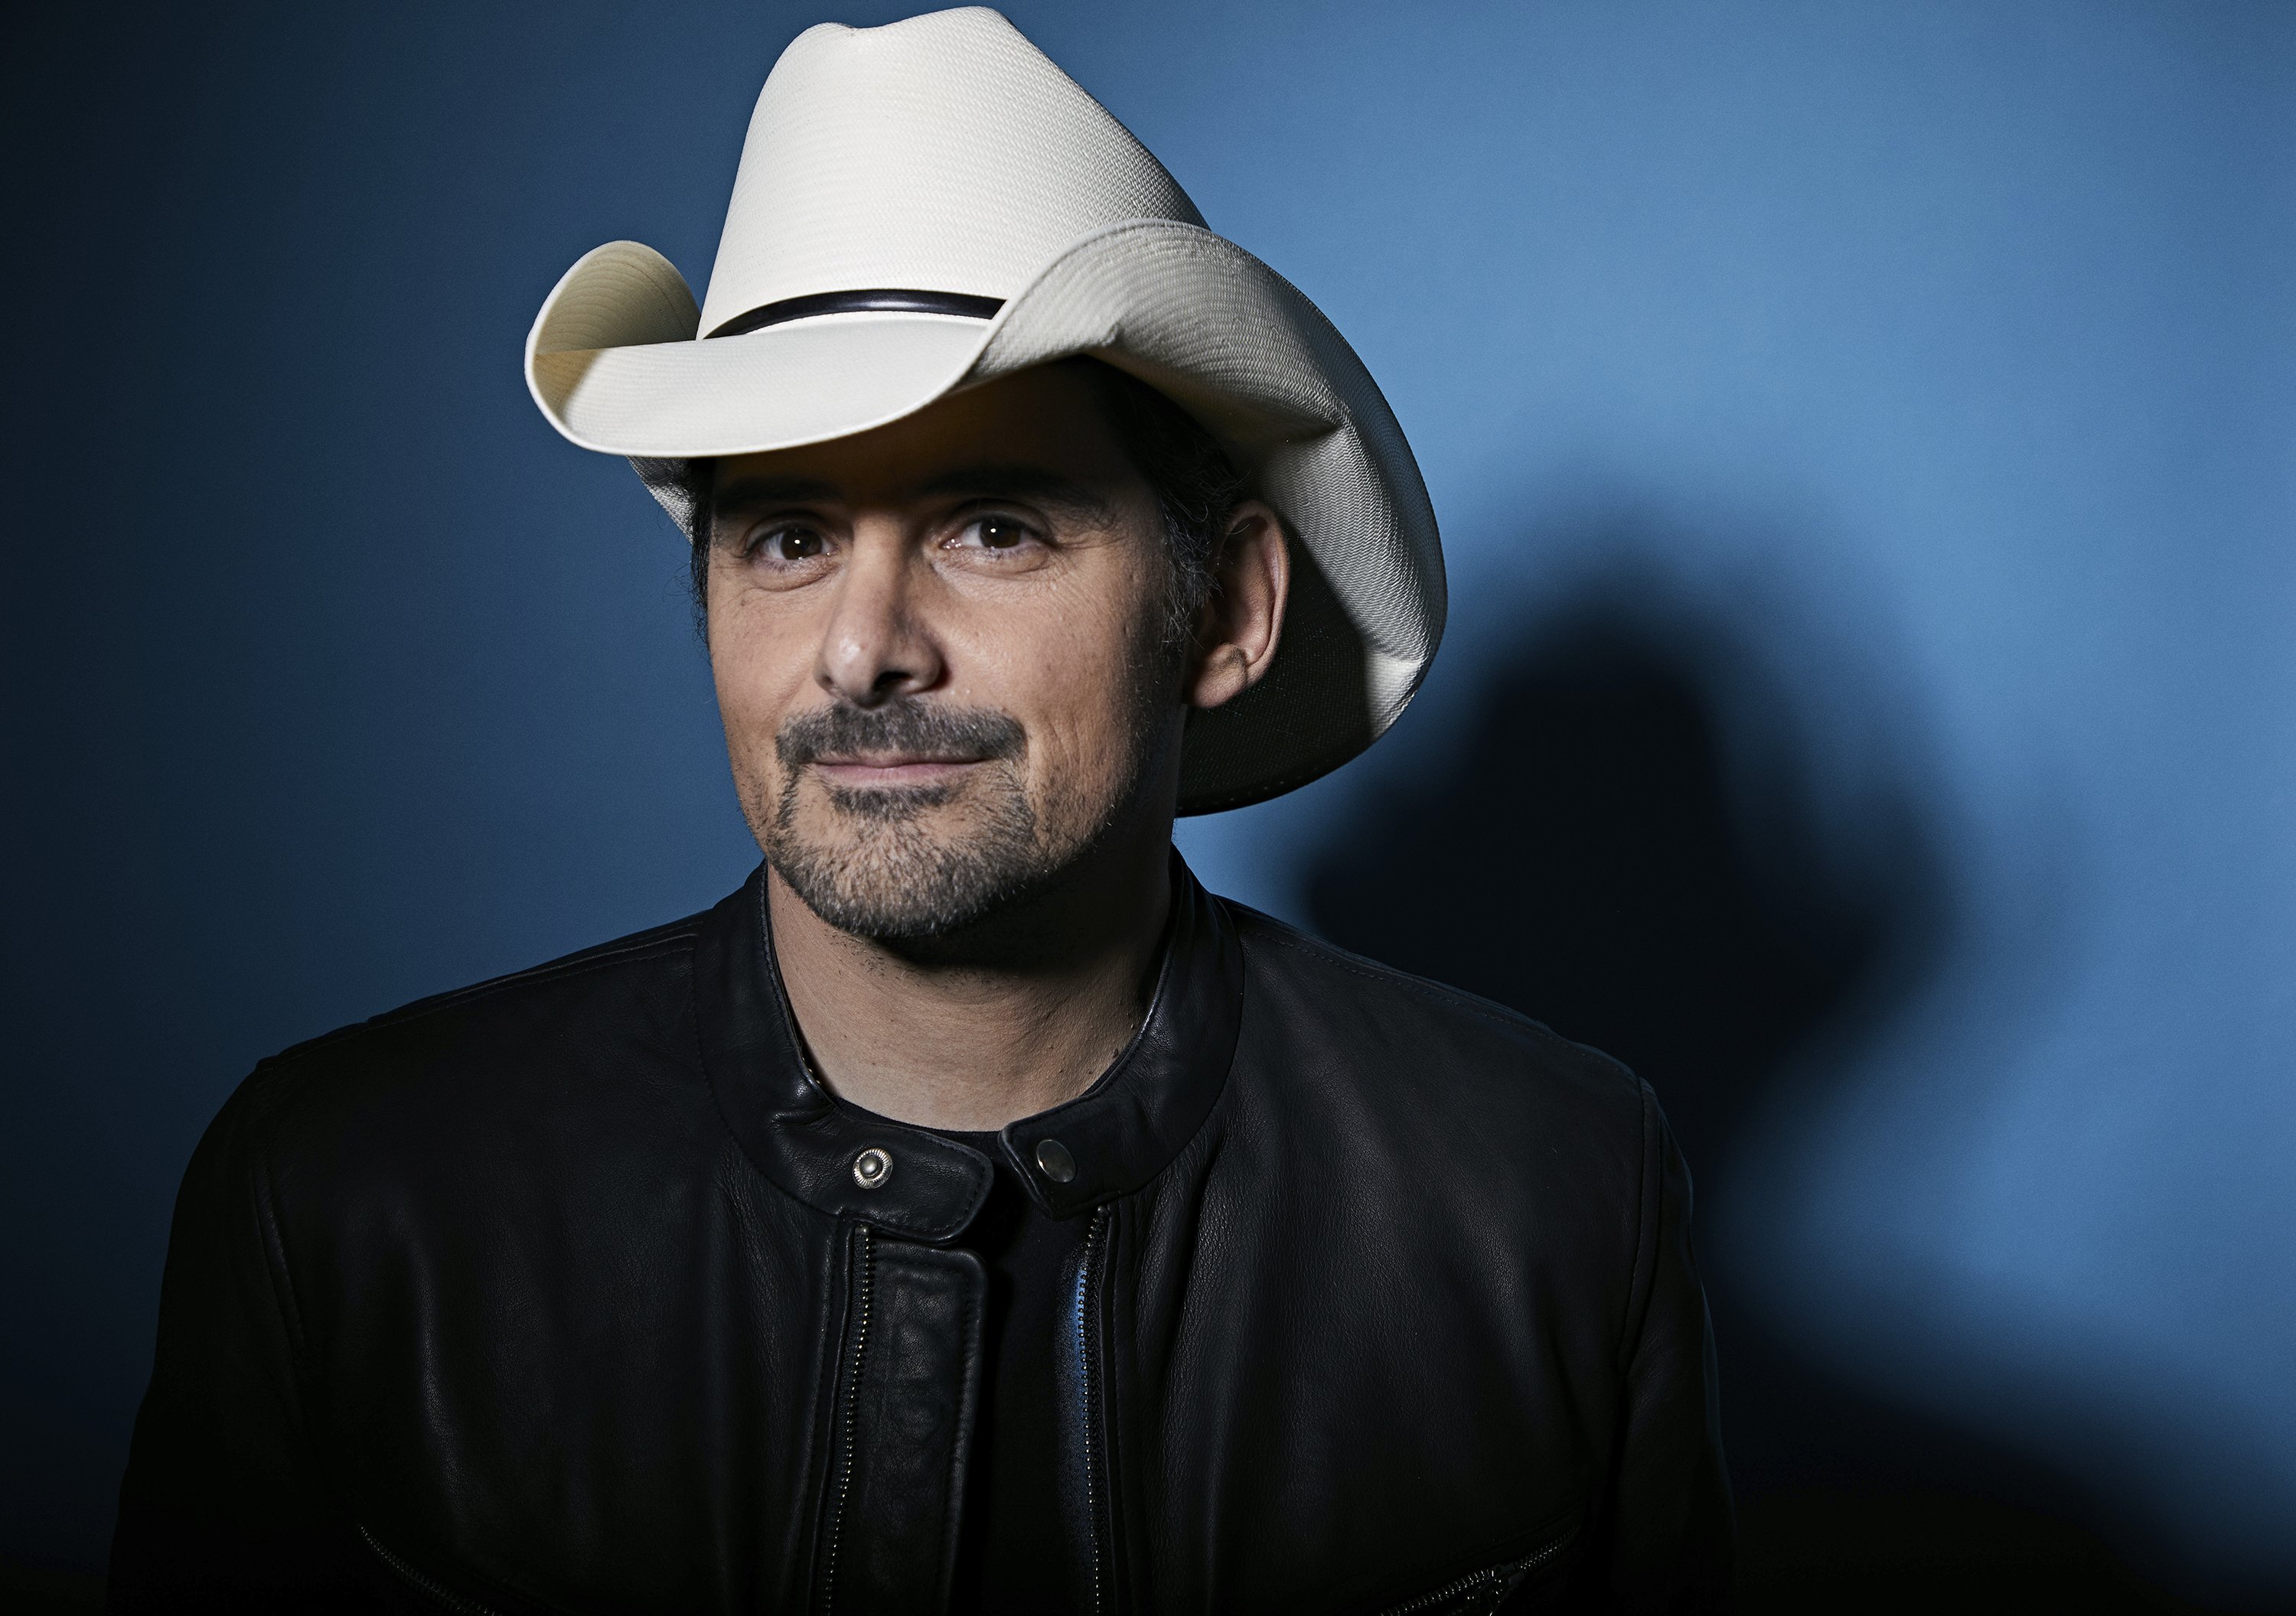 Brad Paisley on drivein concerts 'It's a return to life'